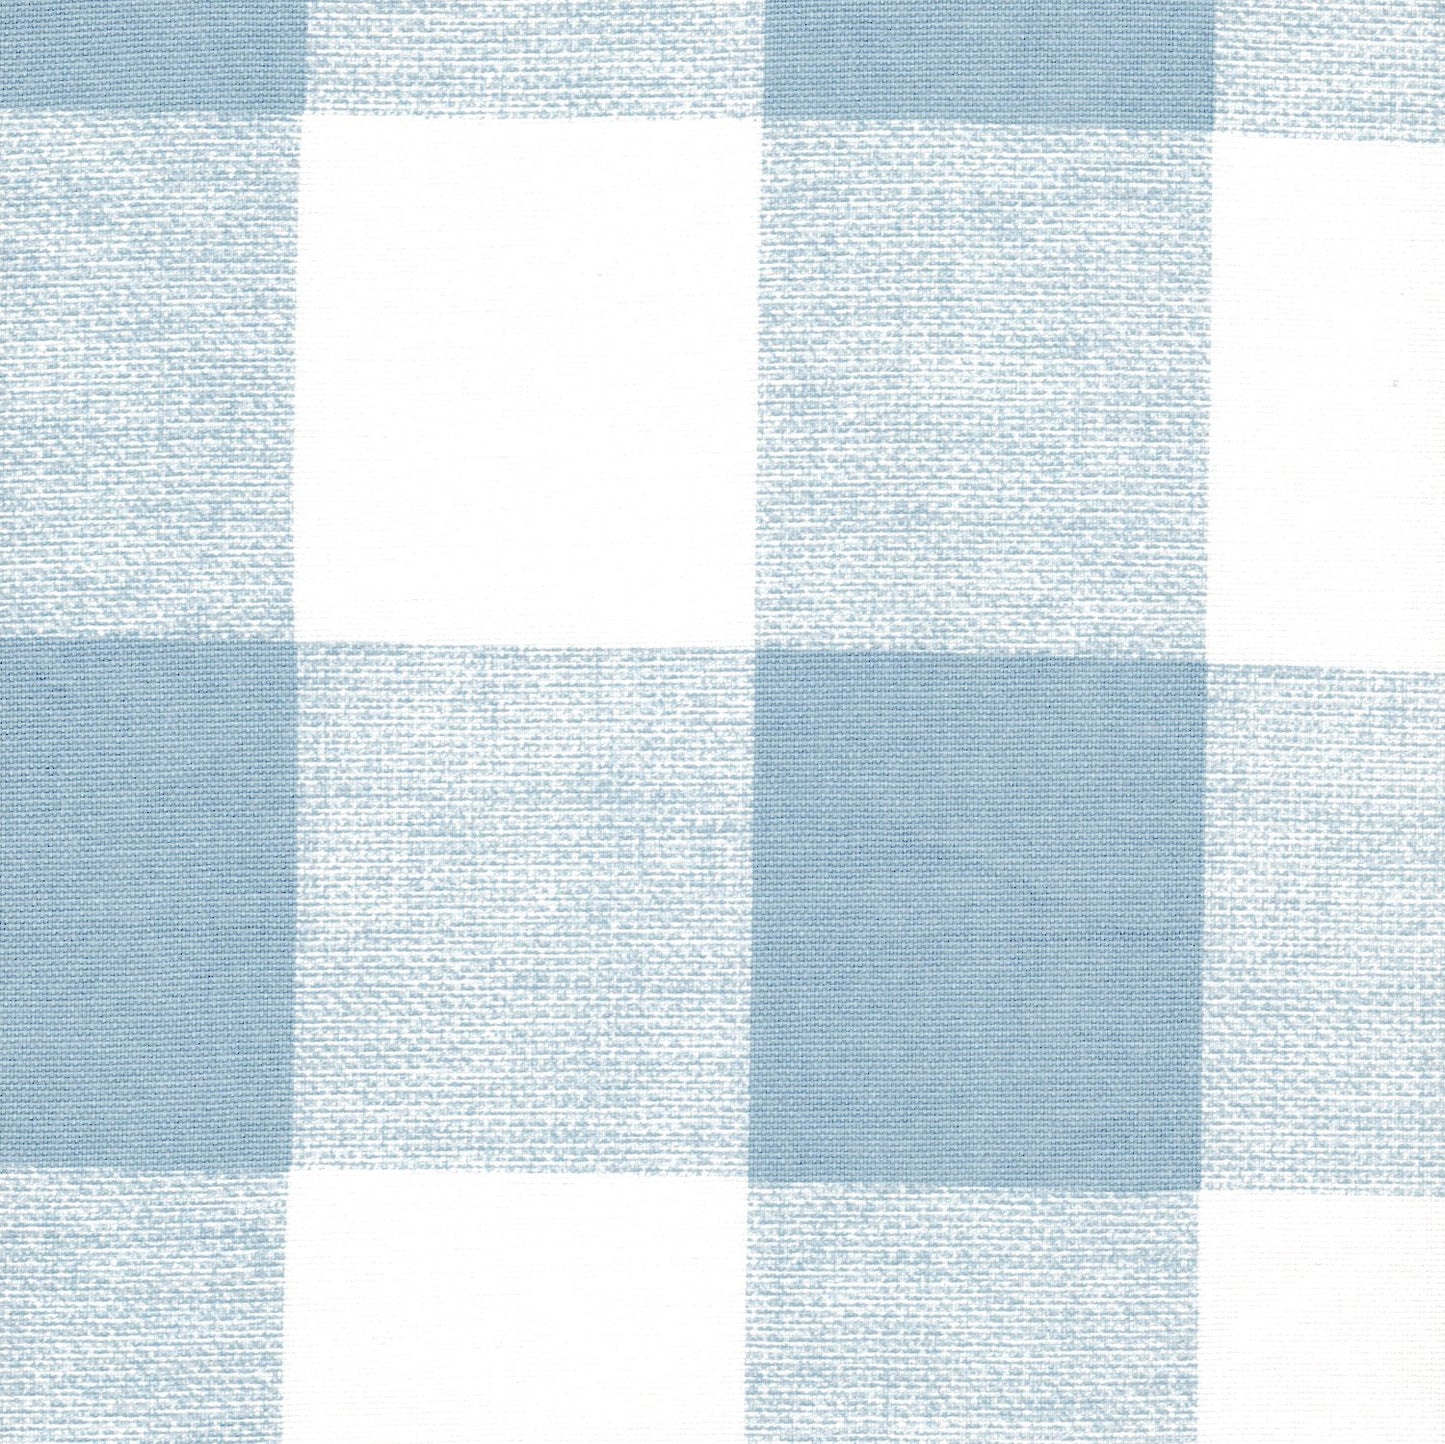 duvet cover in anderson cashmere light blue buffalo check